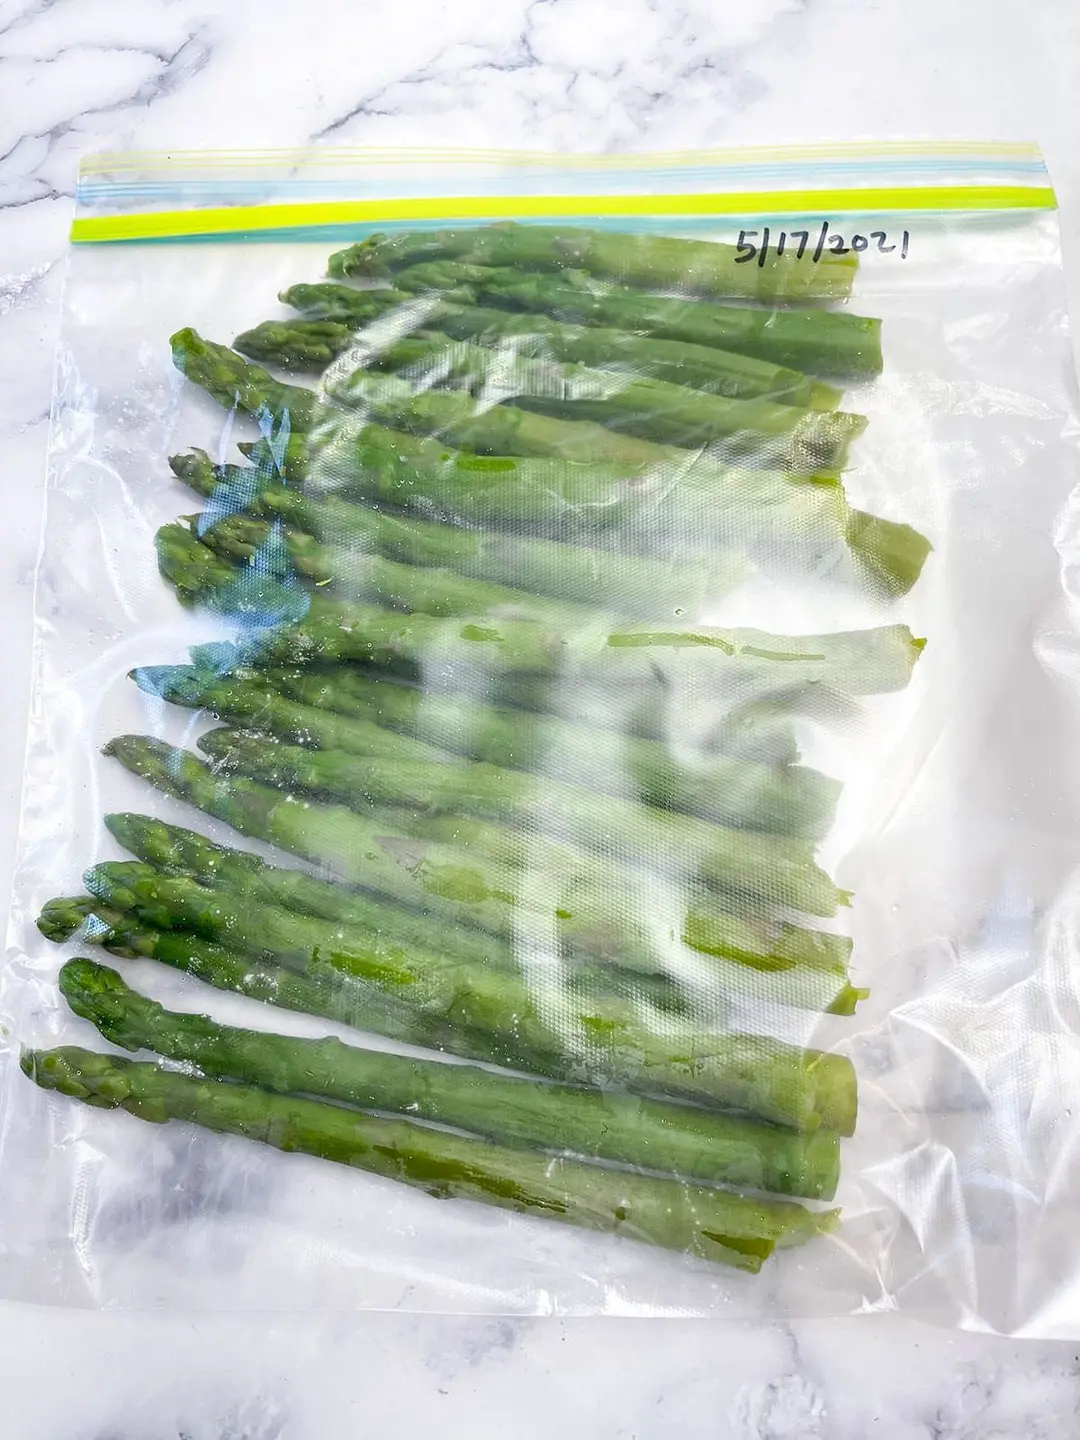 Remember to use frozen asparagus within 10-12 months